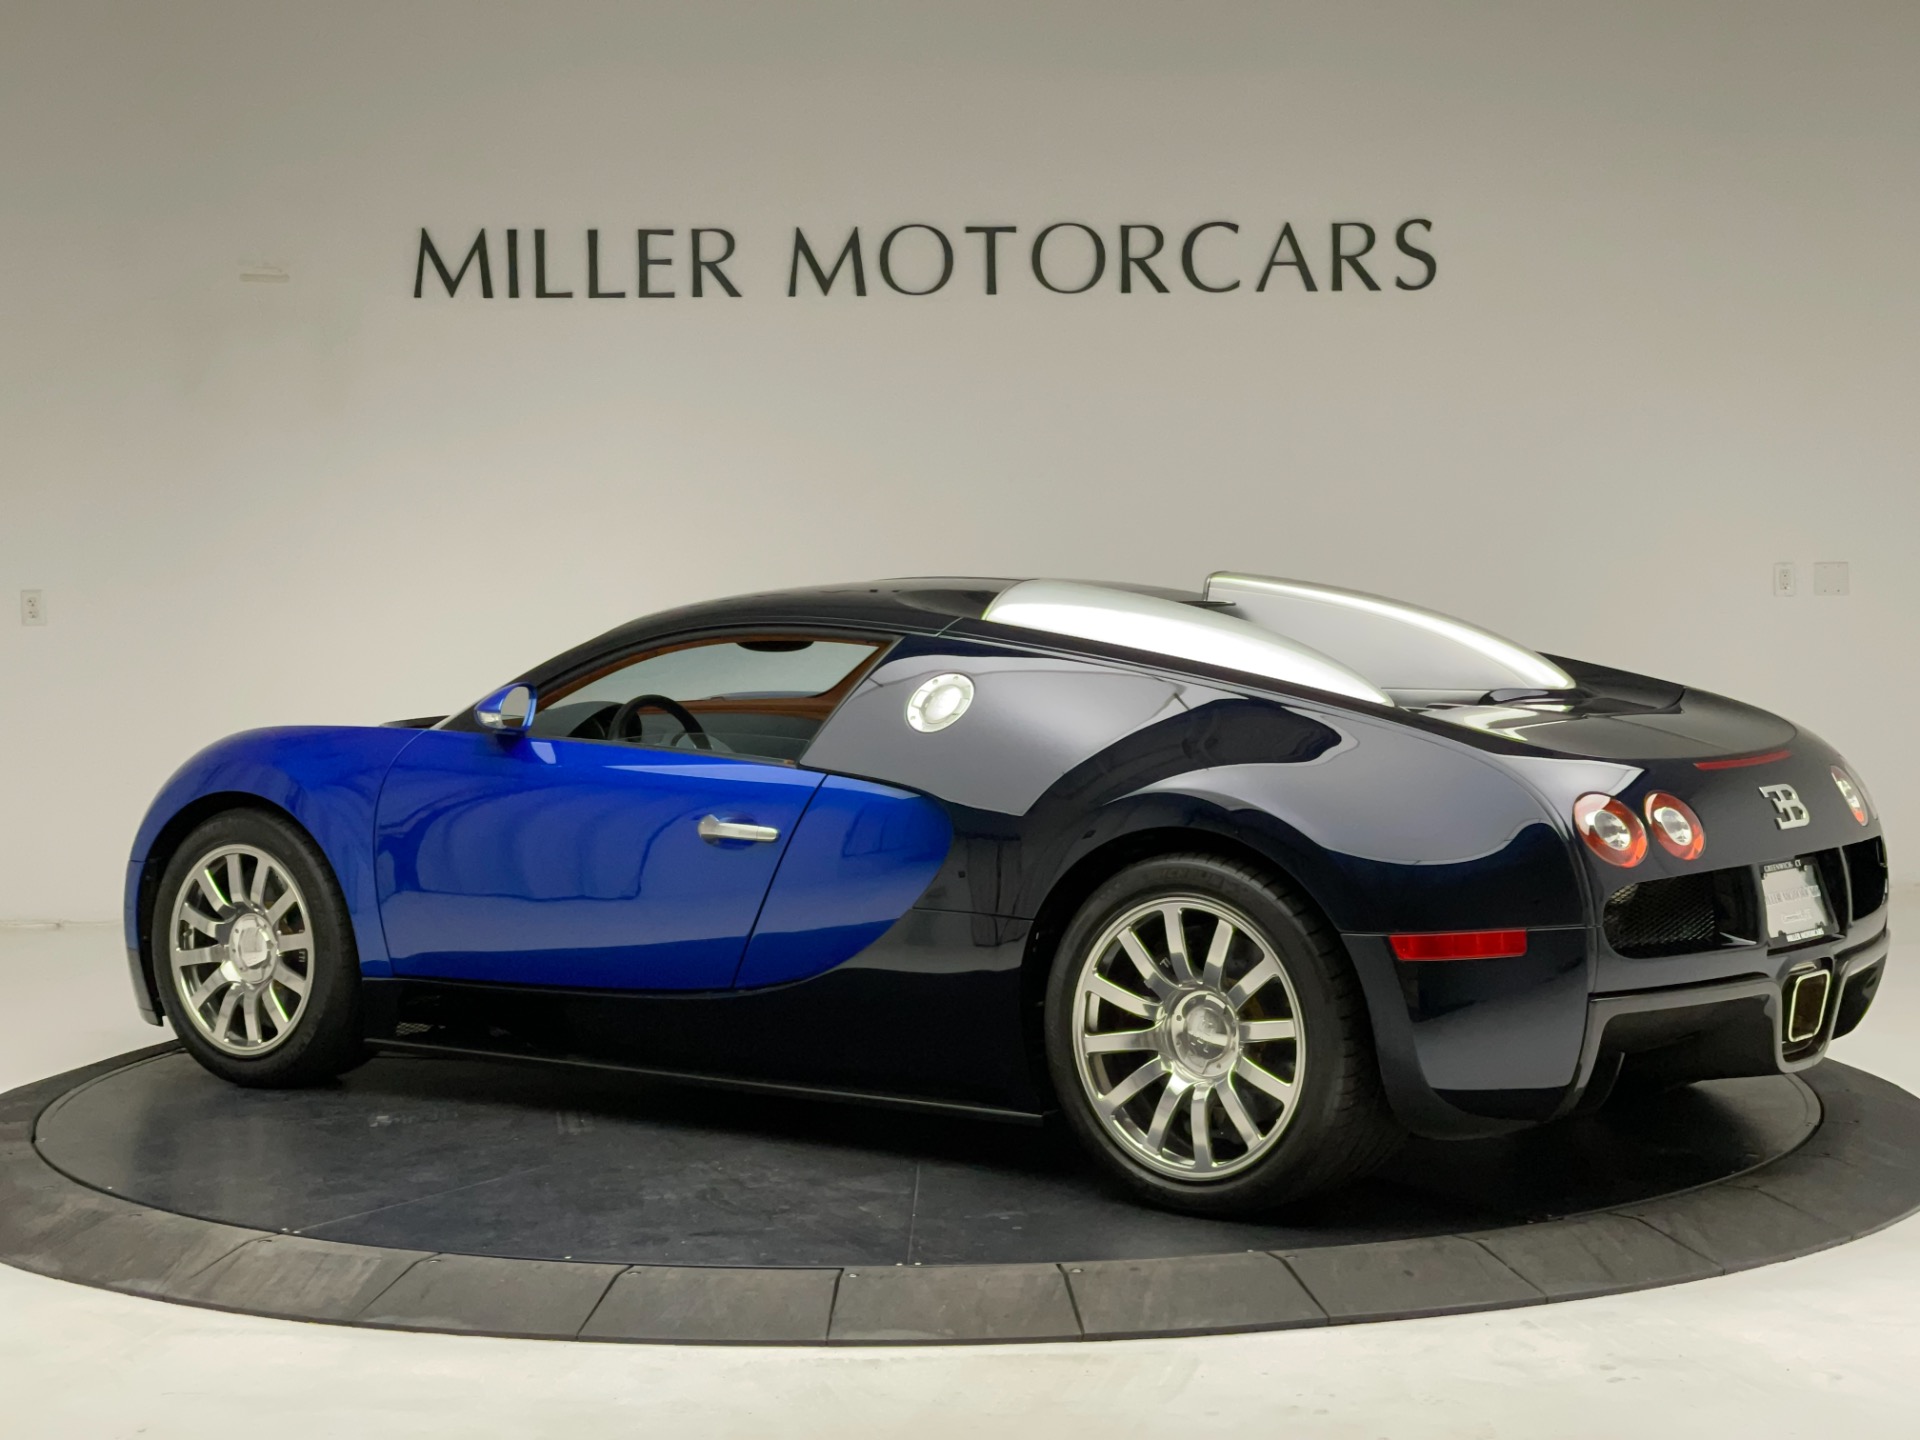 PreOwned 2008 Bugatti Veyron 16.4 Base For Sale () Miller Motorcars